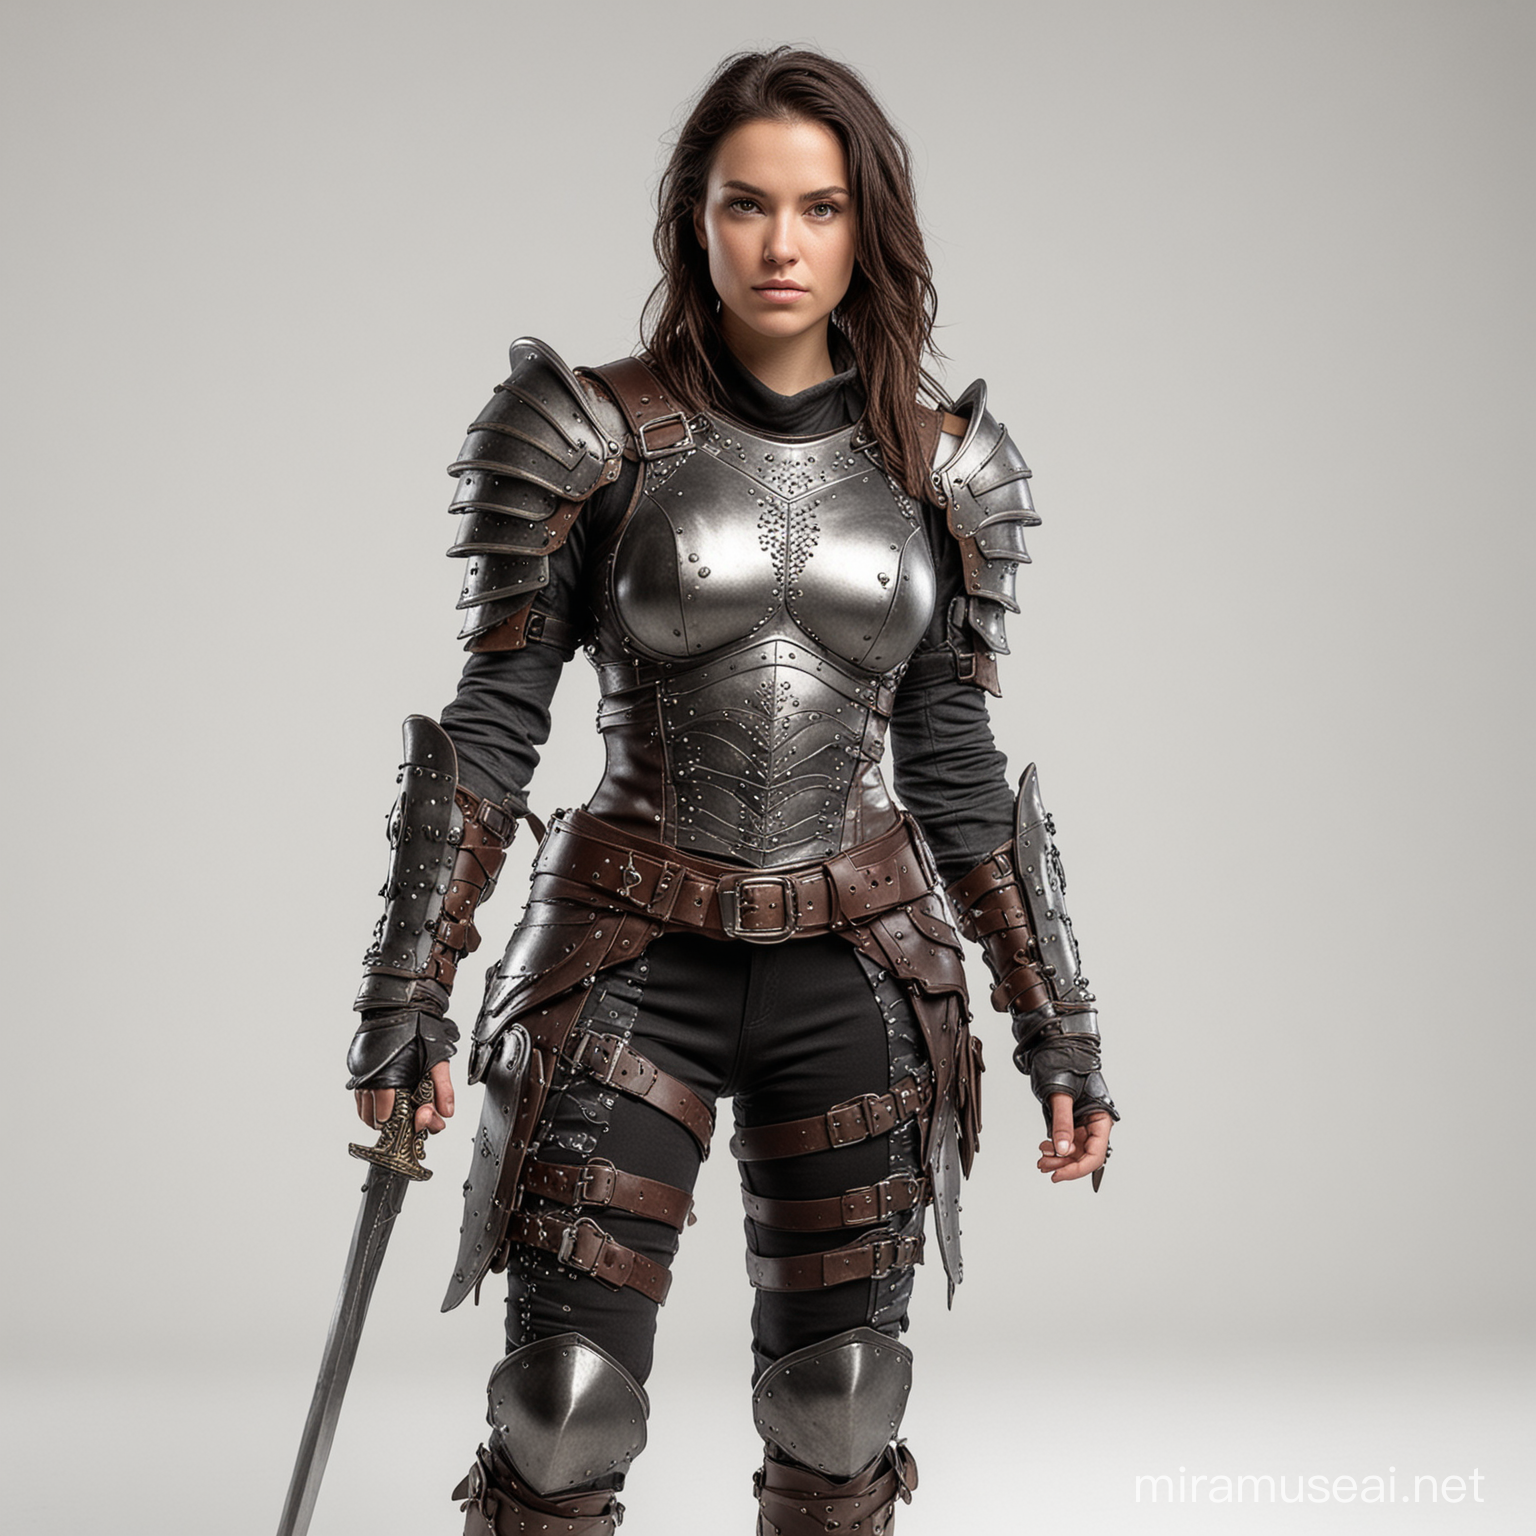 Female Warrior in Leather Armor on White Background